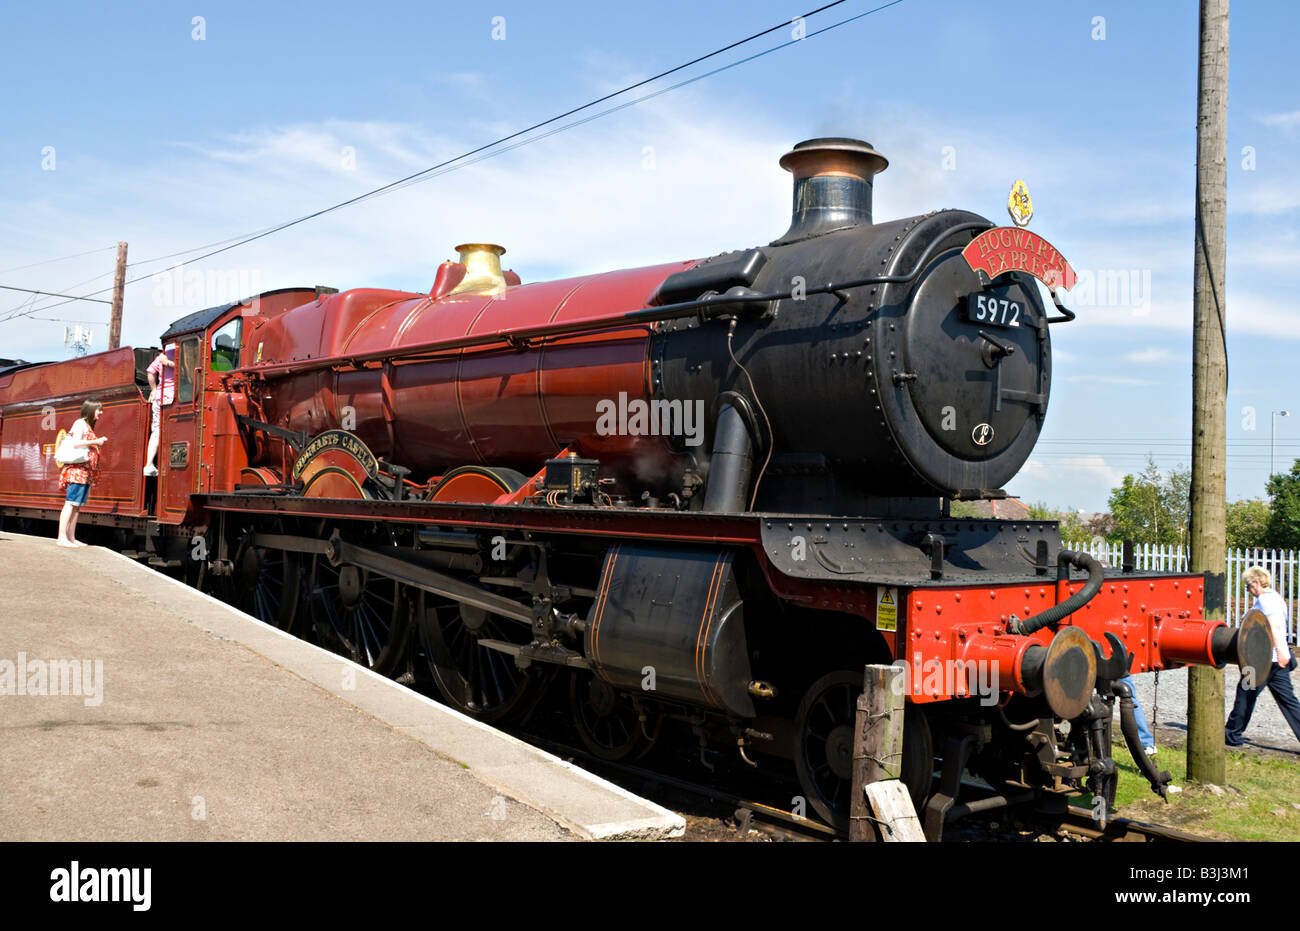 Locomotive GWR 4900 Hall Class 5972 Olton Hall with Hogwarts Express Headboard at Carnforth, England Stock Photo